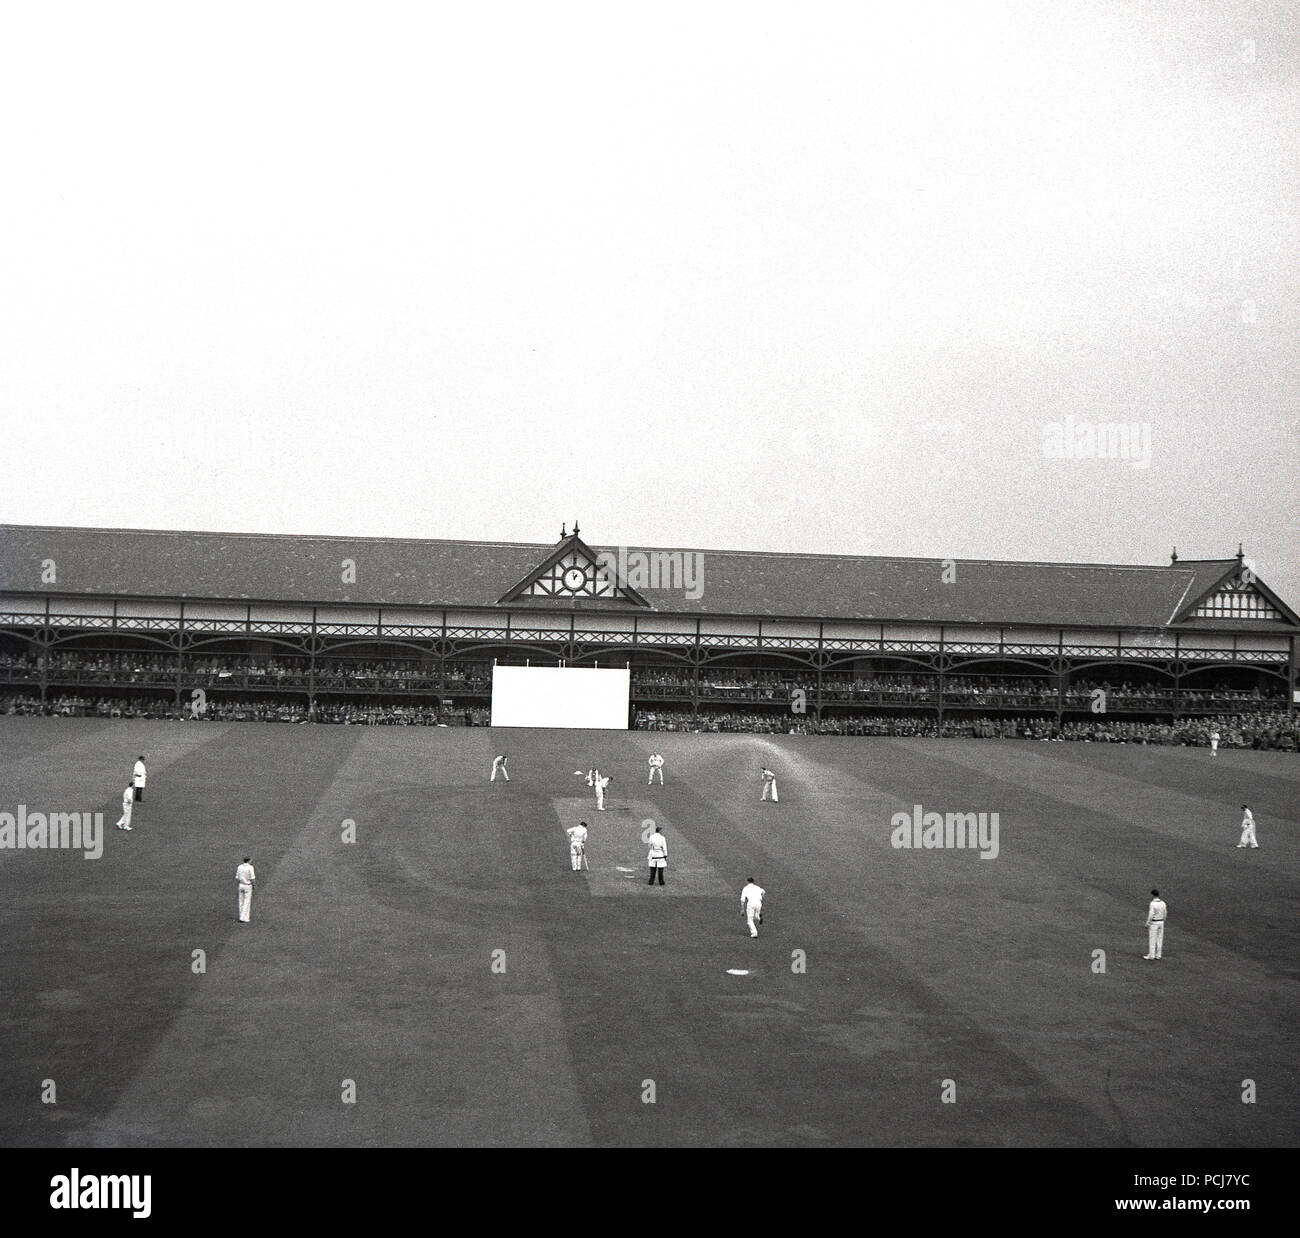 1958, phistorical, county cricket match, England, showing the players out in the field, and on the far side of the ground, the long two-storey traditional wooden-built pavilion for the viewing spectators. Stock Photo